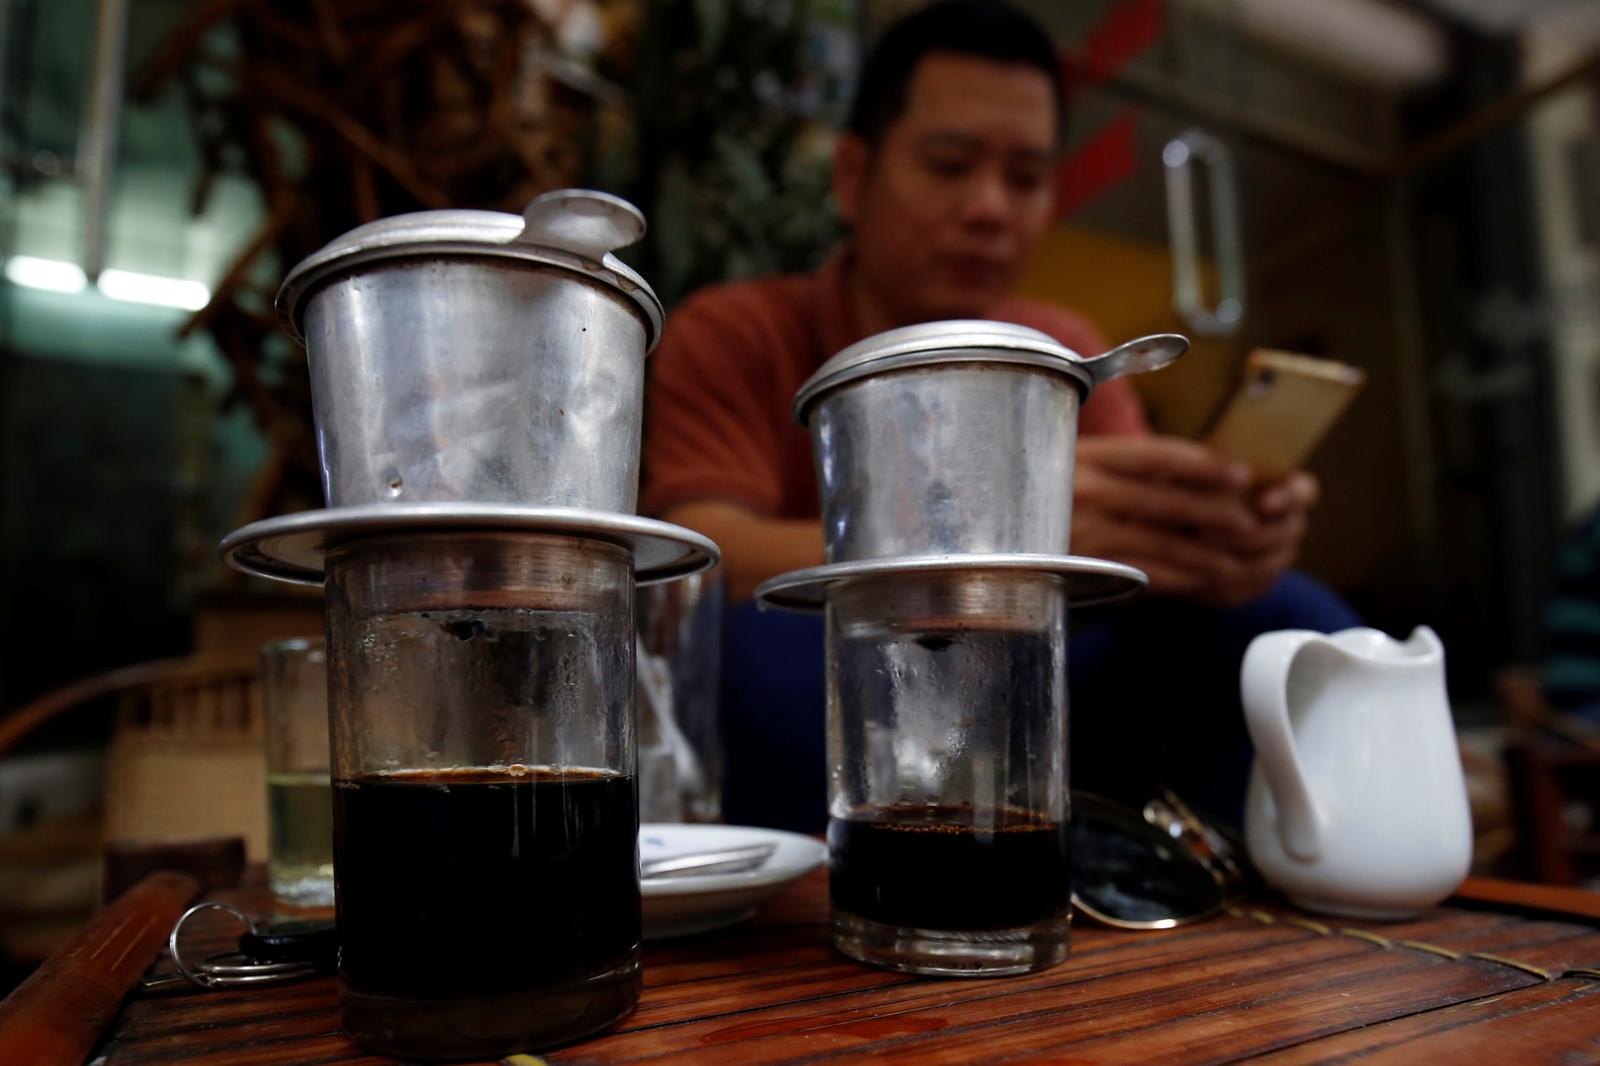 Asia Coffee-Prices pick up in Vietnam on global cues, tight supplies